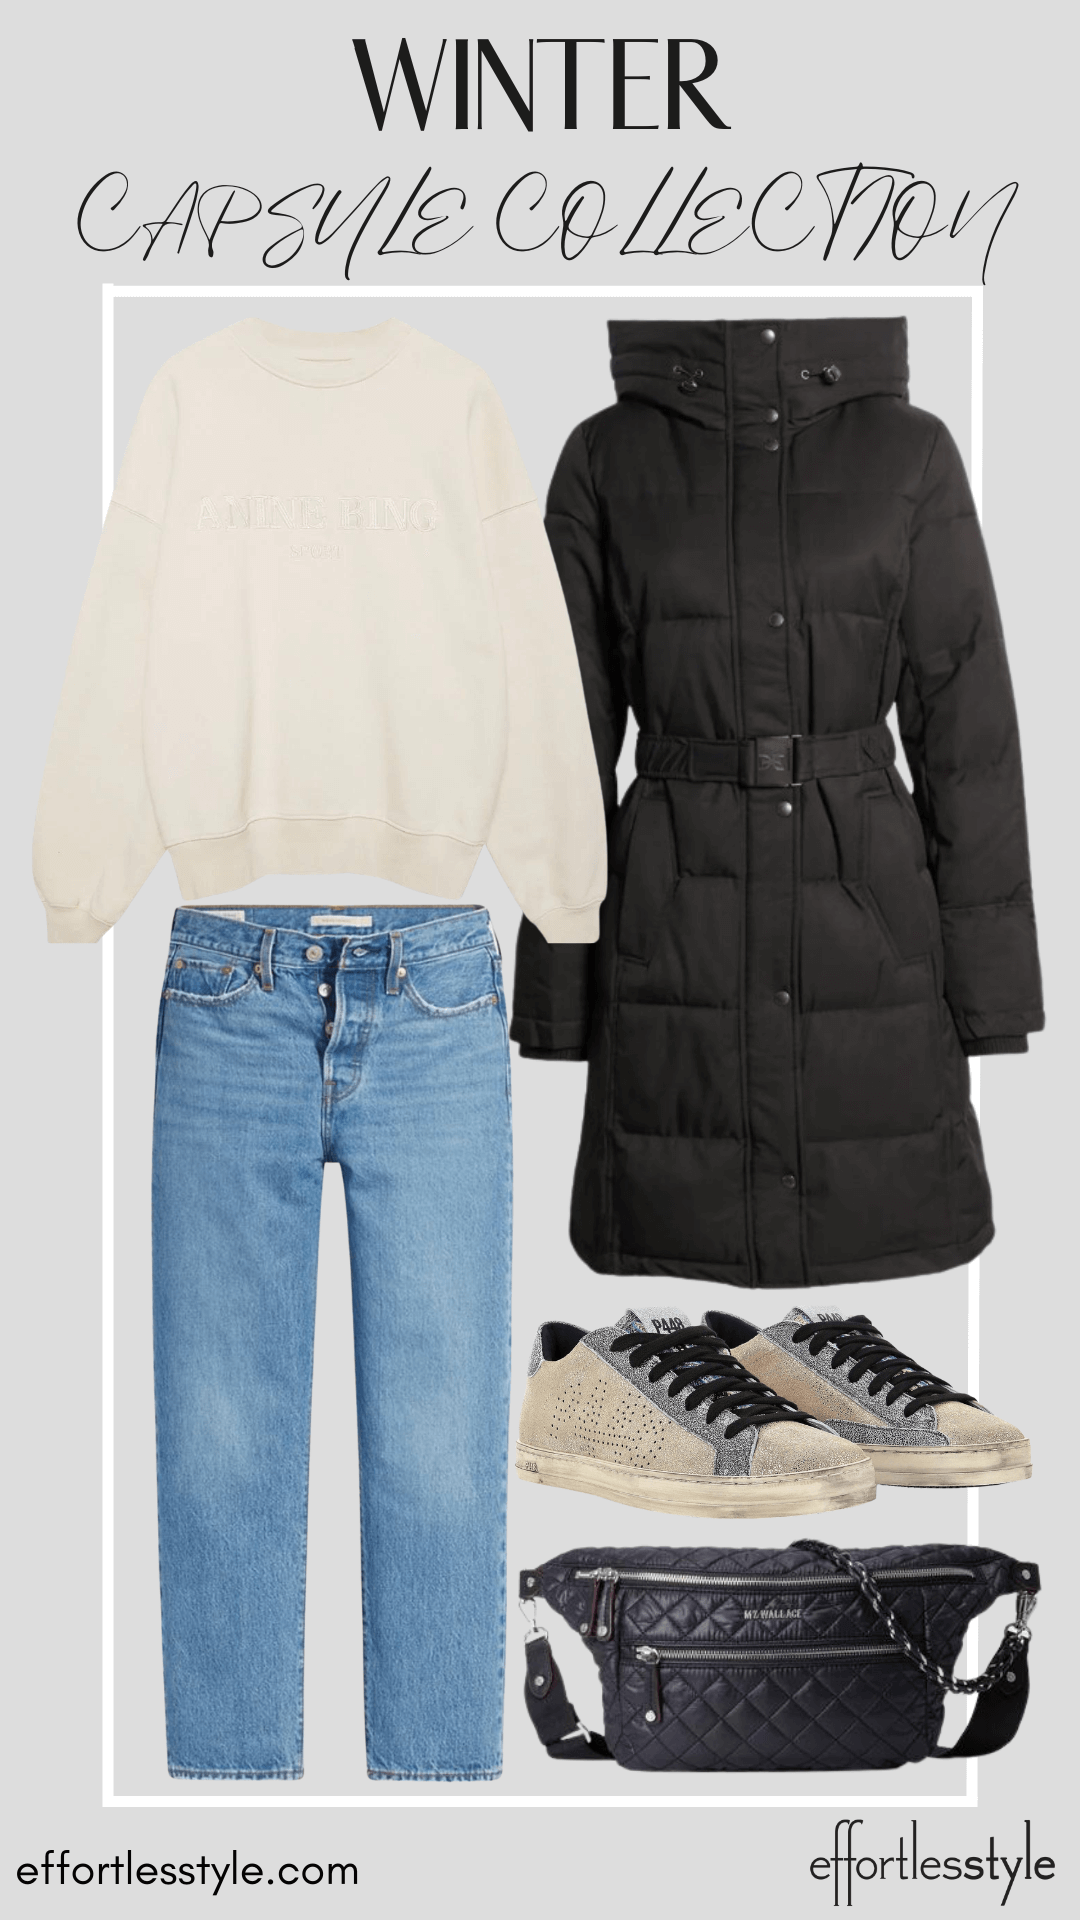 How To Wear Our Winter Capsule Wardrobe – Part 2 Sweatshirt & Dark Wash Jeans cute and cozy outfit for winter cute and comfortable outfit for winter how to style a sweatshirt with jeans and sneakers how to wear a puffer coat flattering puffer coat for winter how to wear your sneakers in the winter